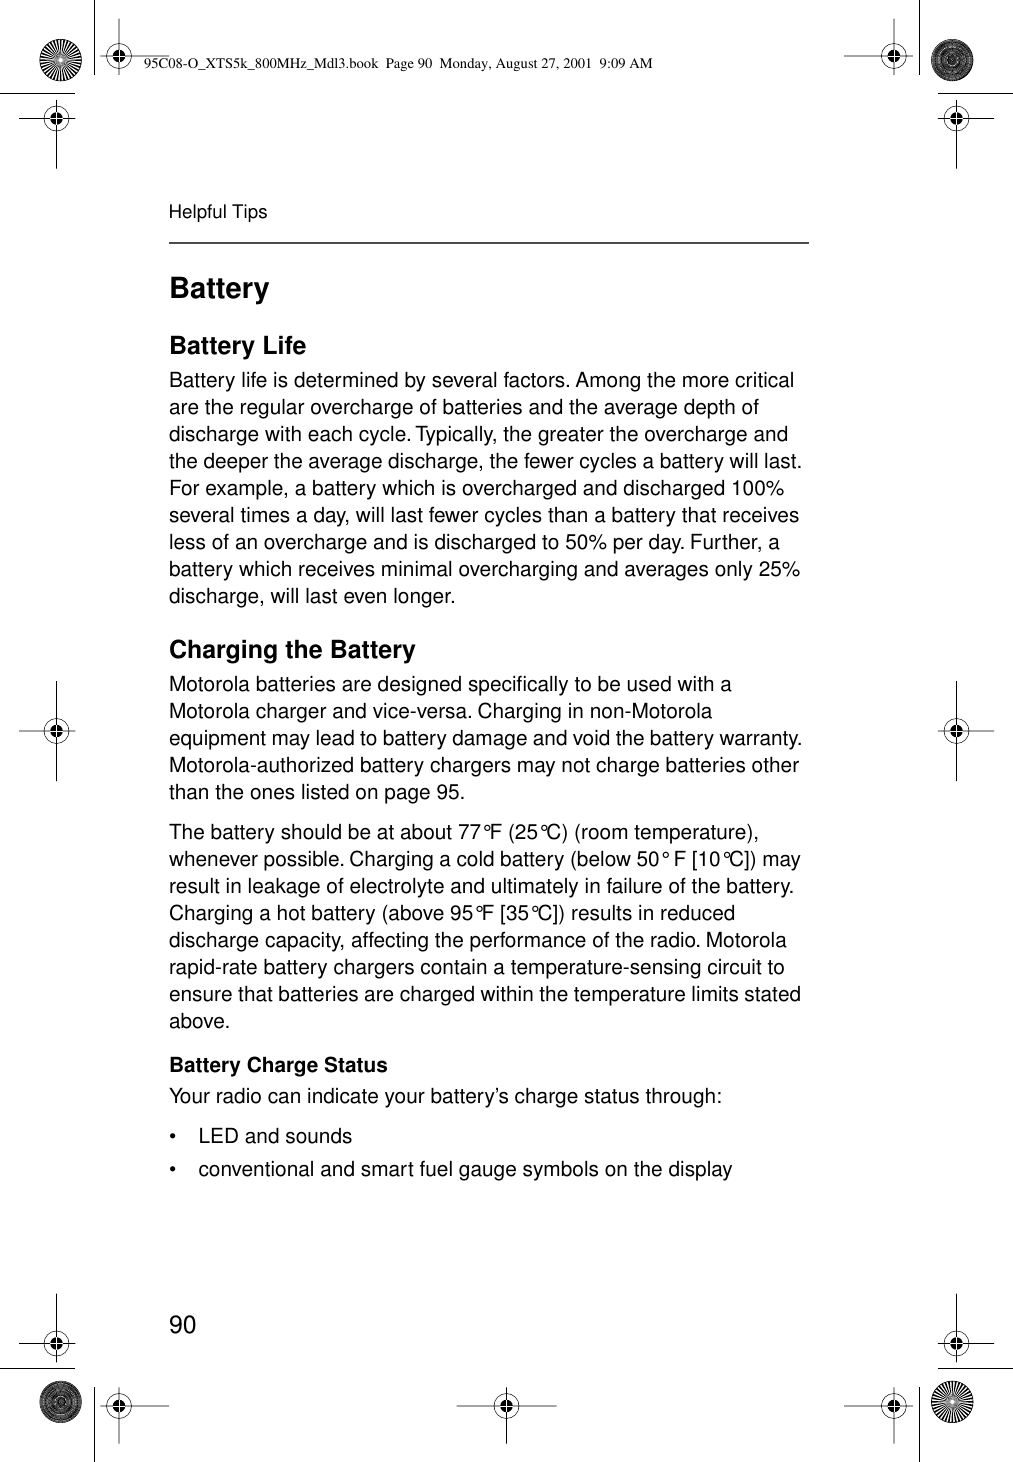 90Helpful TipsBatteryBattery LifeBattery life is determined by several factors. Among the more critical are the regular overcharge of batteries and the average depth of discharge with each cycle. Typically, the greater the overcharge and the deeper the average discharge, the fewer cycles a battery will last. For example, a battery which is overcharged and discharged 100% several times a day, will last fewer cycles than a battery that receives less of an overcharge and is discharged to 50% per day. Further, a battery which receives minimal overcharging and averages only 25% discharge, will last even longer.Charging the BatteryMotorola batteries are designed speciﬁcally to be used with a Motorola charger and vice-versa. Charging in non-Motorola equipment may lead to battery damage and void the battery warranty. Motorola-authorized battery chargers may not charge batteries other than the ones listed on page 95.The battery should be at about 77°F (25°C) (room temperature), whenever possible. Charging a cold battery (below 50° F [10°C]) may result in leakage of electrolyte and ultimately in failure of the battery. Charging a hot battery (above 95°F [35°C]) results in reduced discharge capacity, affecting the performance of the radio. Motorola rapid-rate battery chargers contain a temperature-sensing circuit to ensure that batteries are charged within the temperature limits stated above.Battery Charge StatusYour radio can indicate your battery’s charge status through:• LED and sounds• conventional and smart fuel gauge symbols on the display95C08-O_XTS5k_800MHz_Mdl3.book  Page 90  Monday, August 27, 2001  9:09 AM